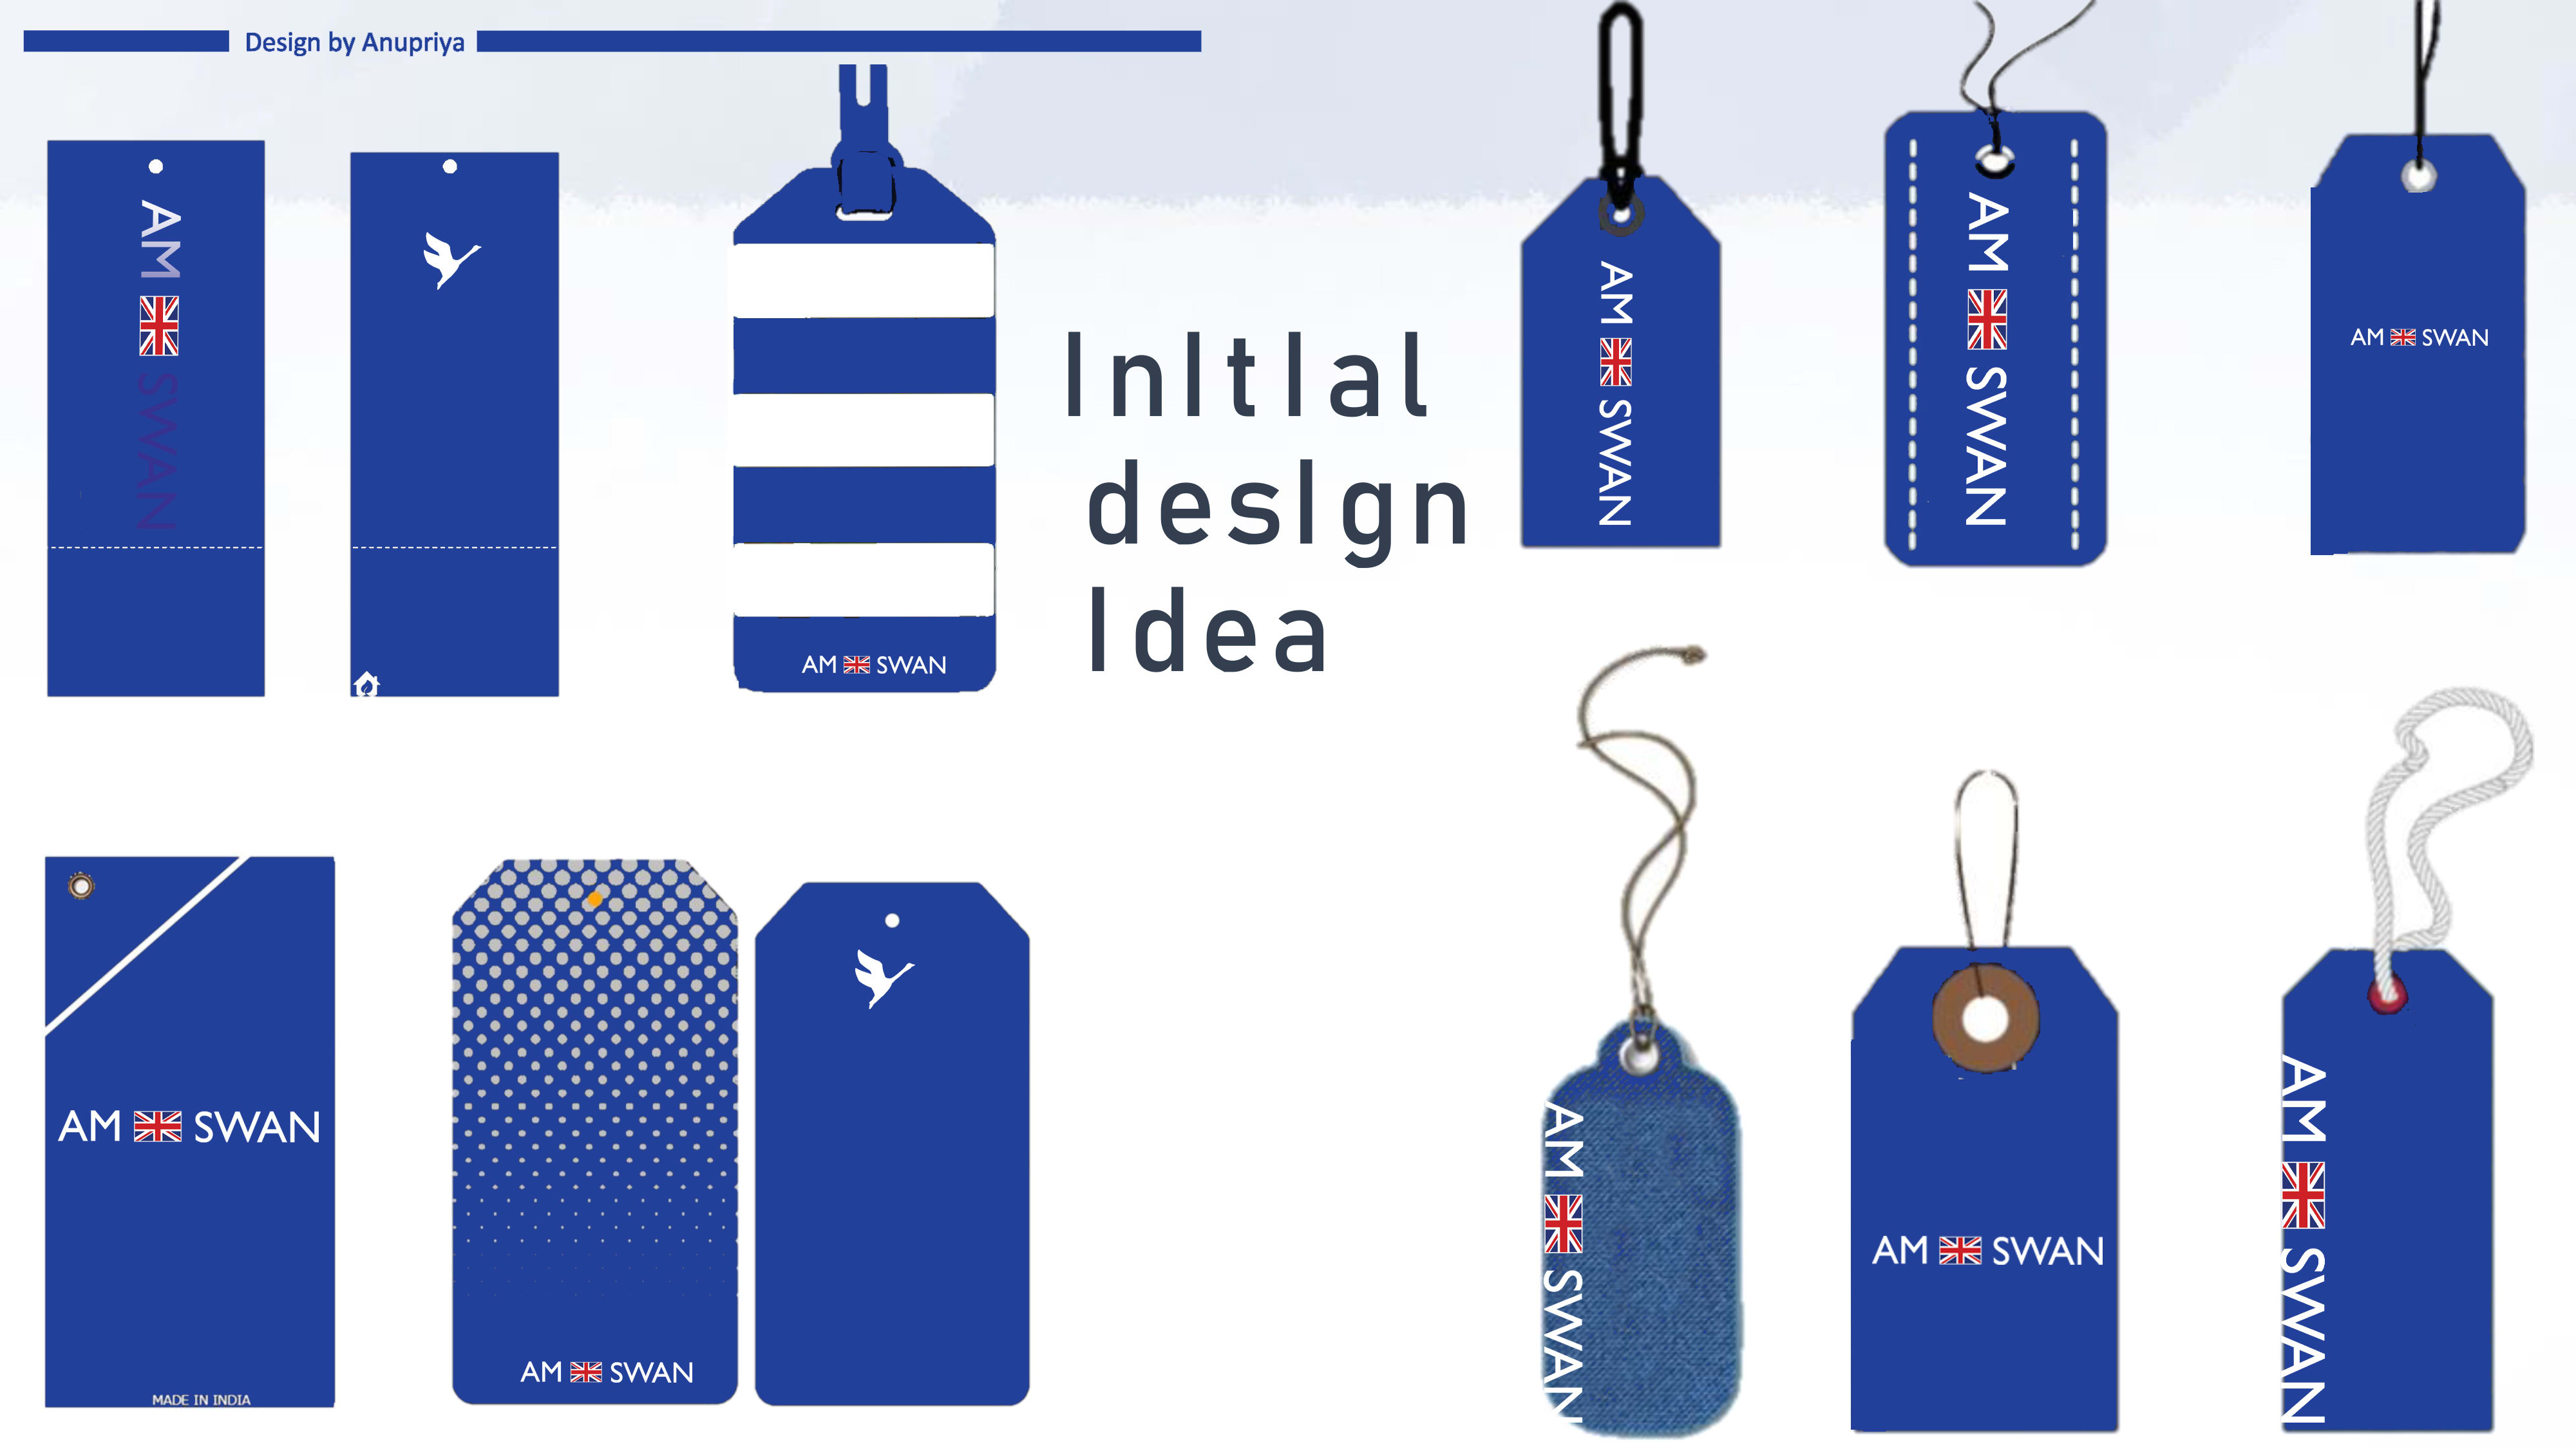 design clothing labels and hang tags